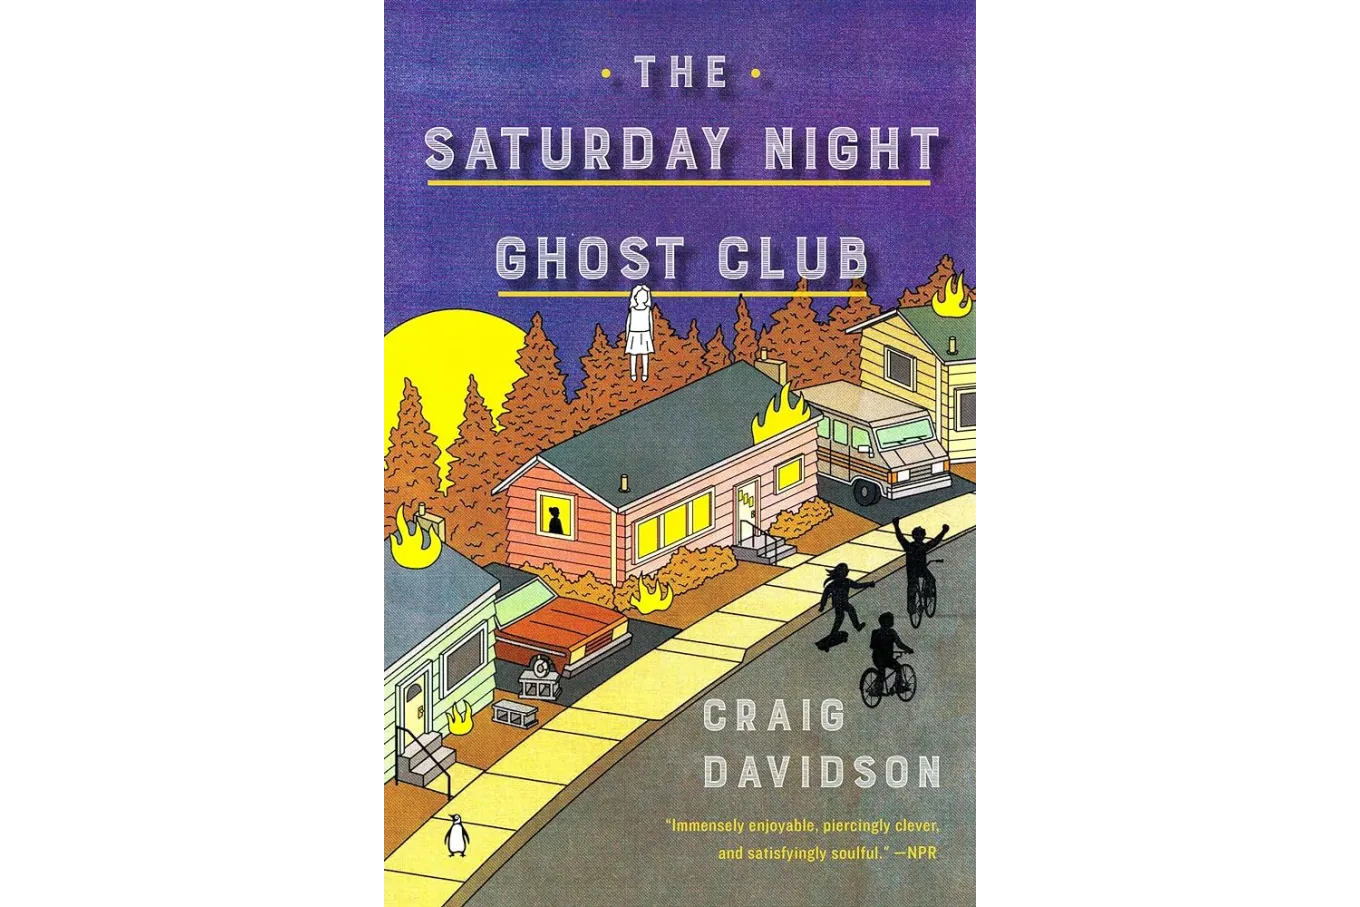 Cover image - a cartoonish depiction of a nighttime neighborhood scene. Three shadowy kids ride down the street on bikes and skateboards, the three visible houses have fires burning on the roofs and in the shrubs, and above the pink central house, a ghostly white figure hangs suspended in mid-air.